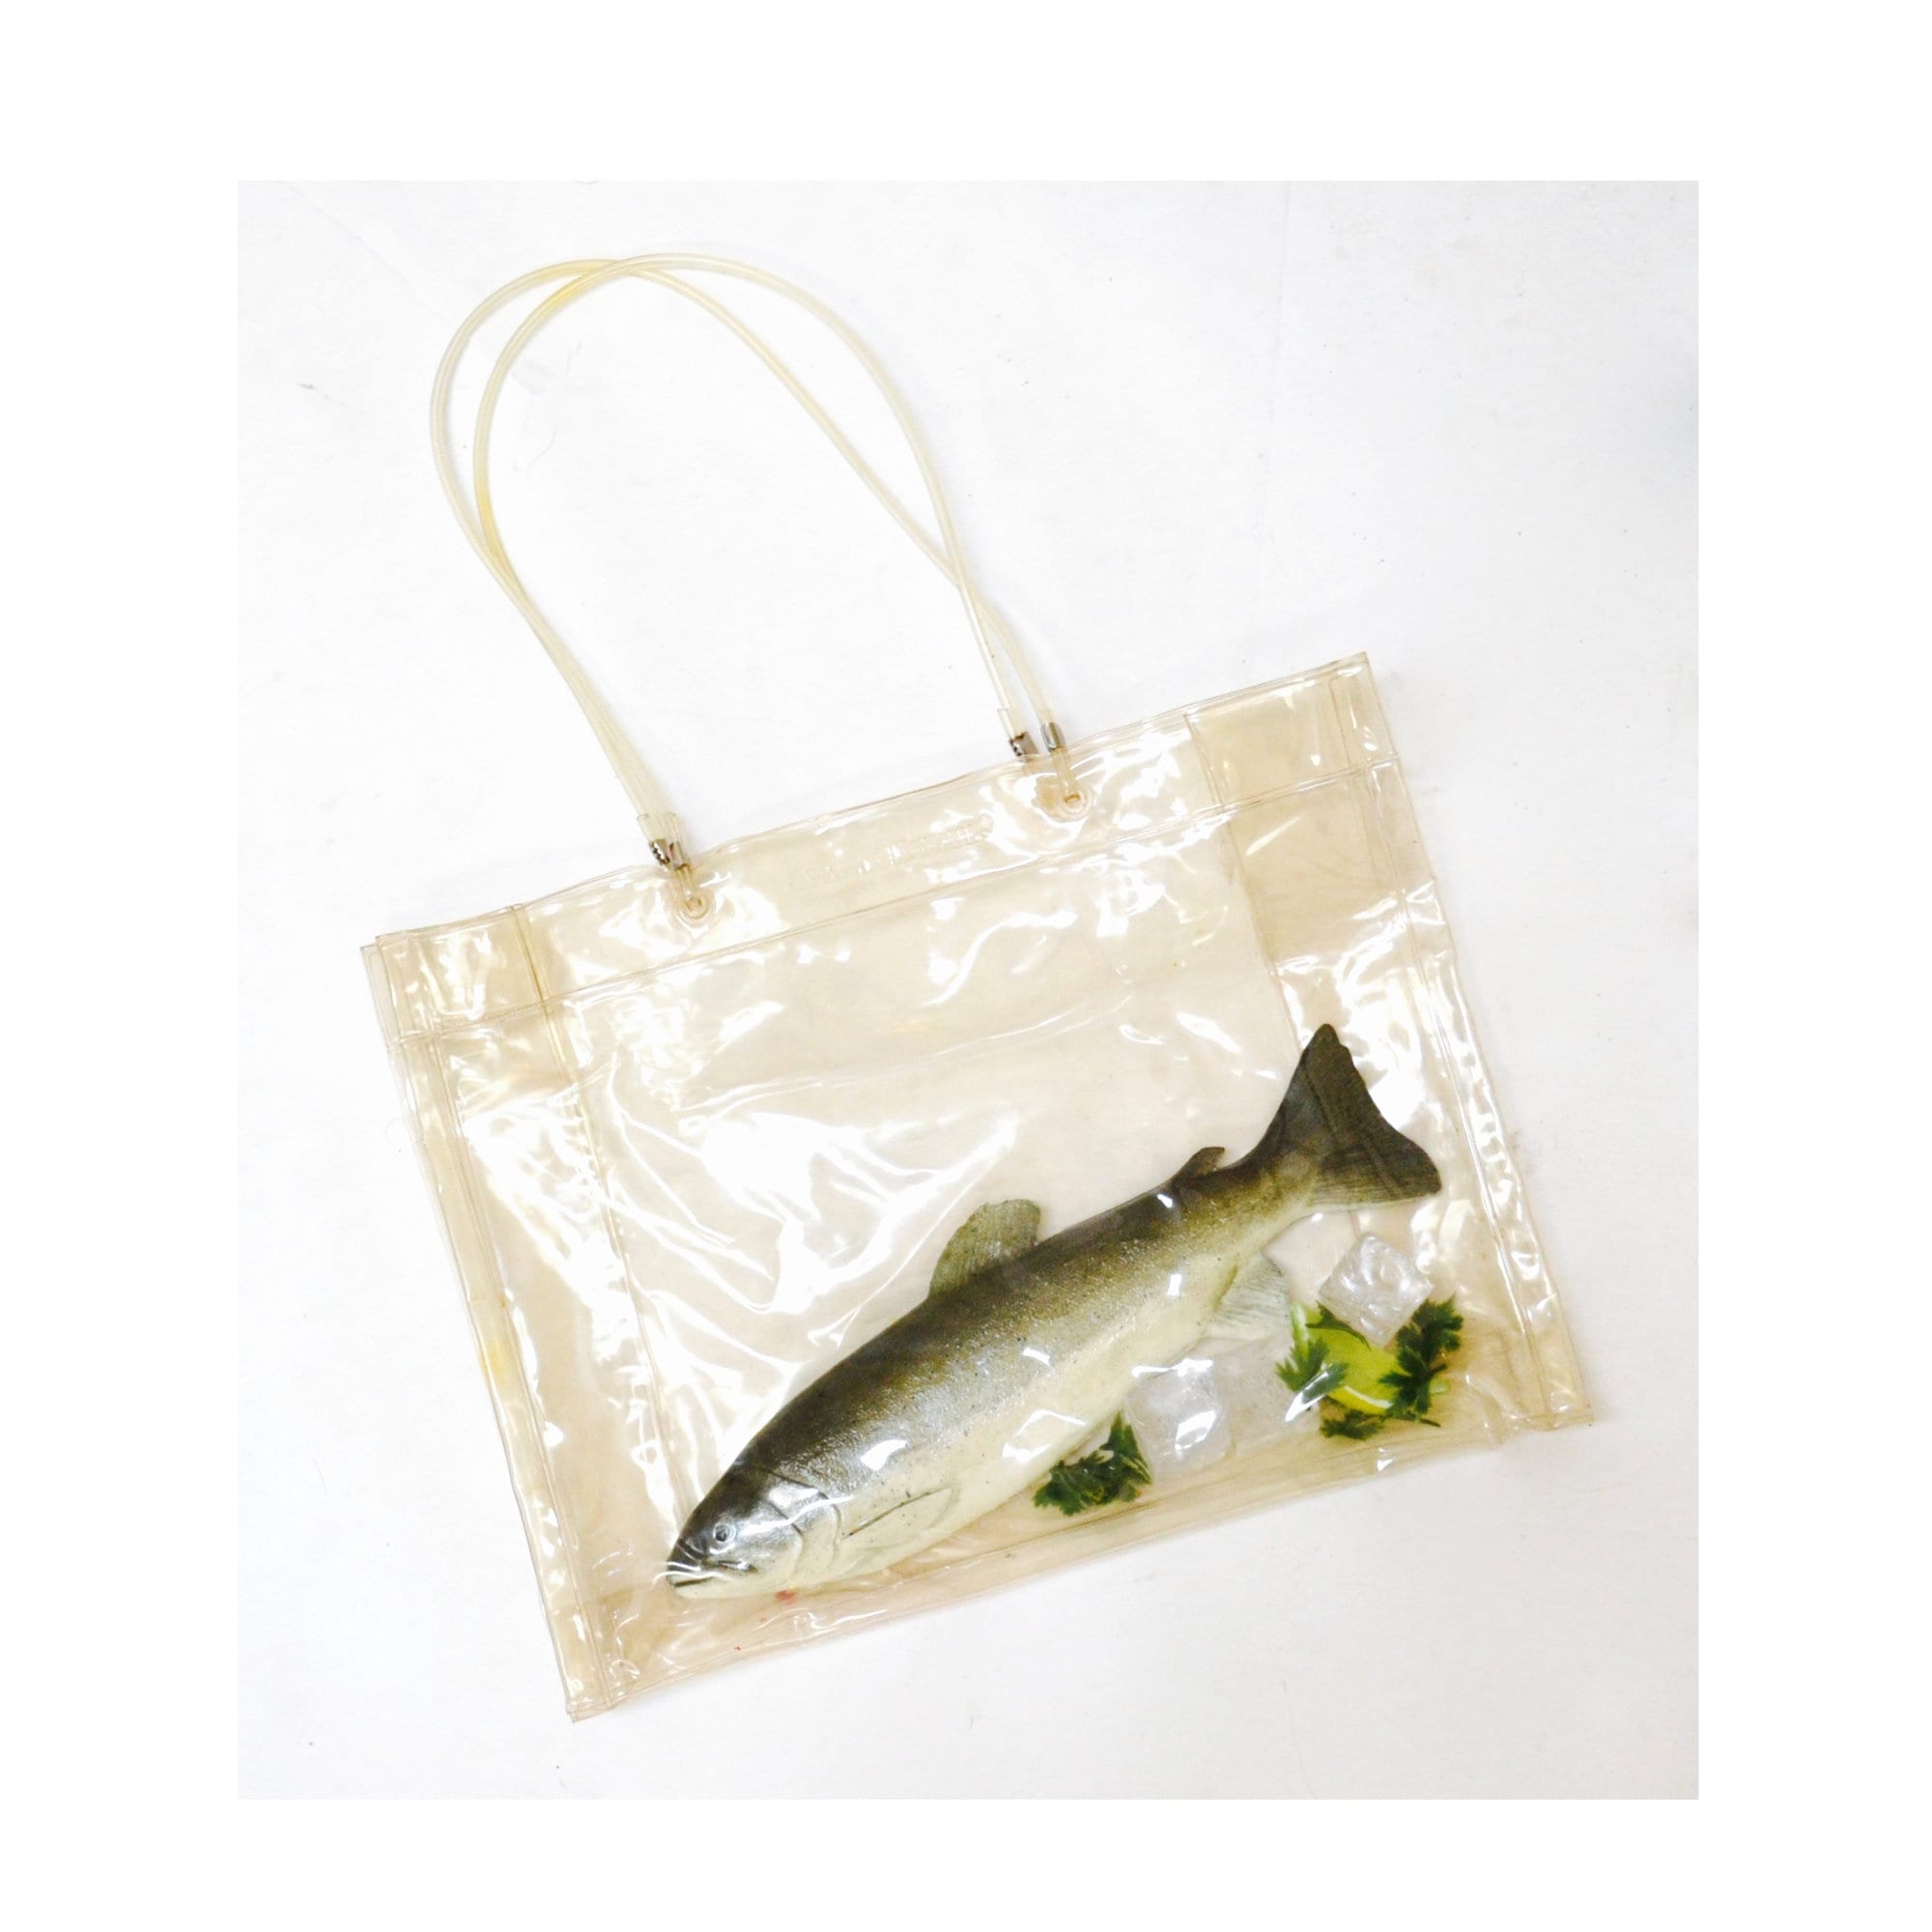 70s Vintage Beach Bag Clear Transparent PVC Bag Tote With Fish by Avant De  Dormir the Trout Purse 1984 Pop Art la Truite Made in Italy -  Canada